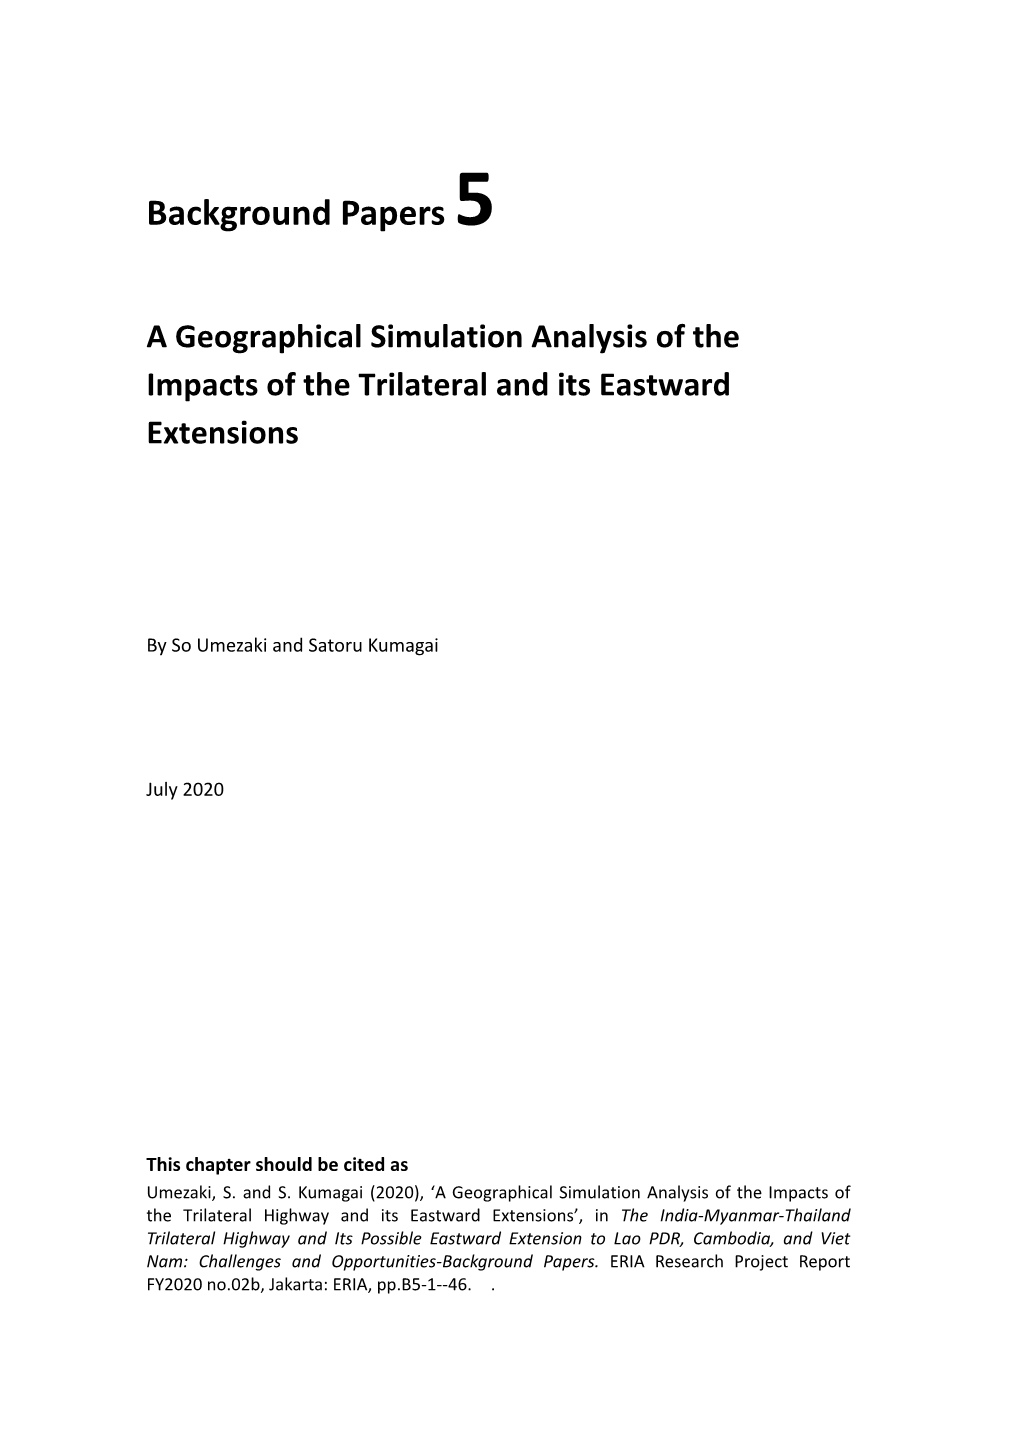 The India-Myanmar-Thailand Trilateral Highway and Its Possible Eastward Extension to Lao PDR, Cambodia, and Viet Nam: Challenges and Opportunities-Background Papers